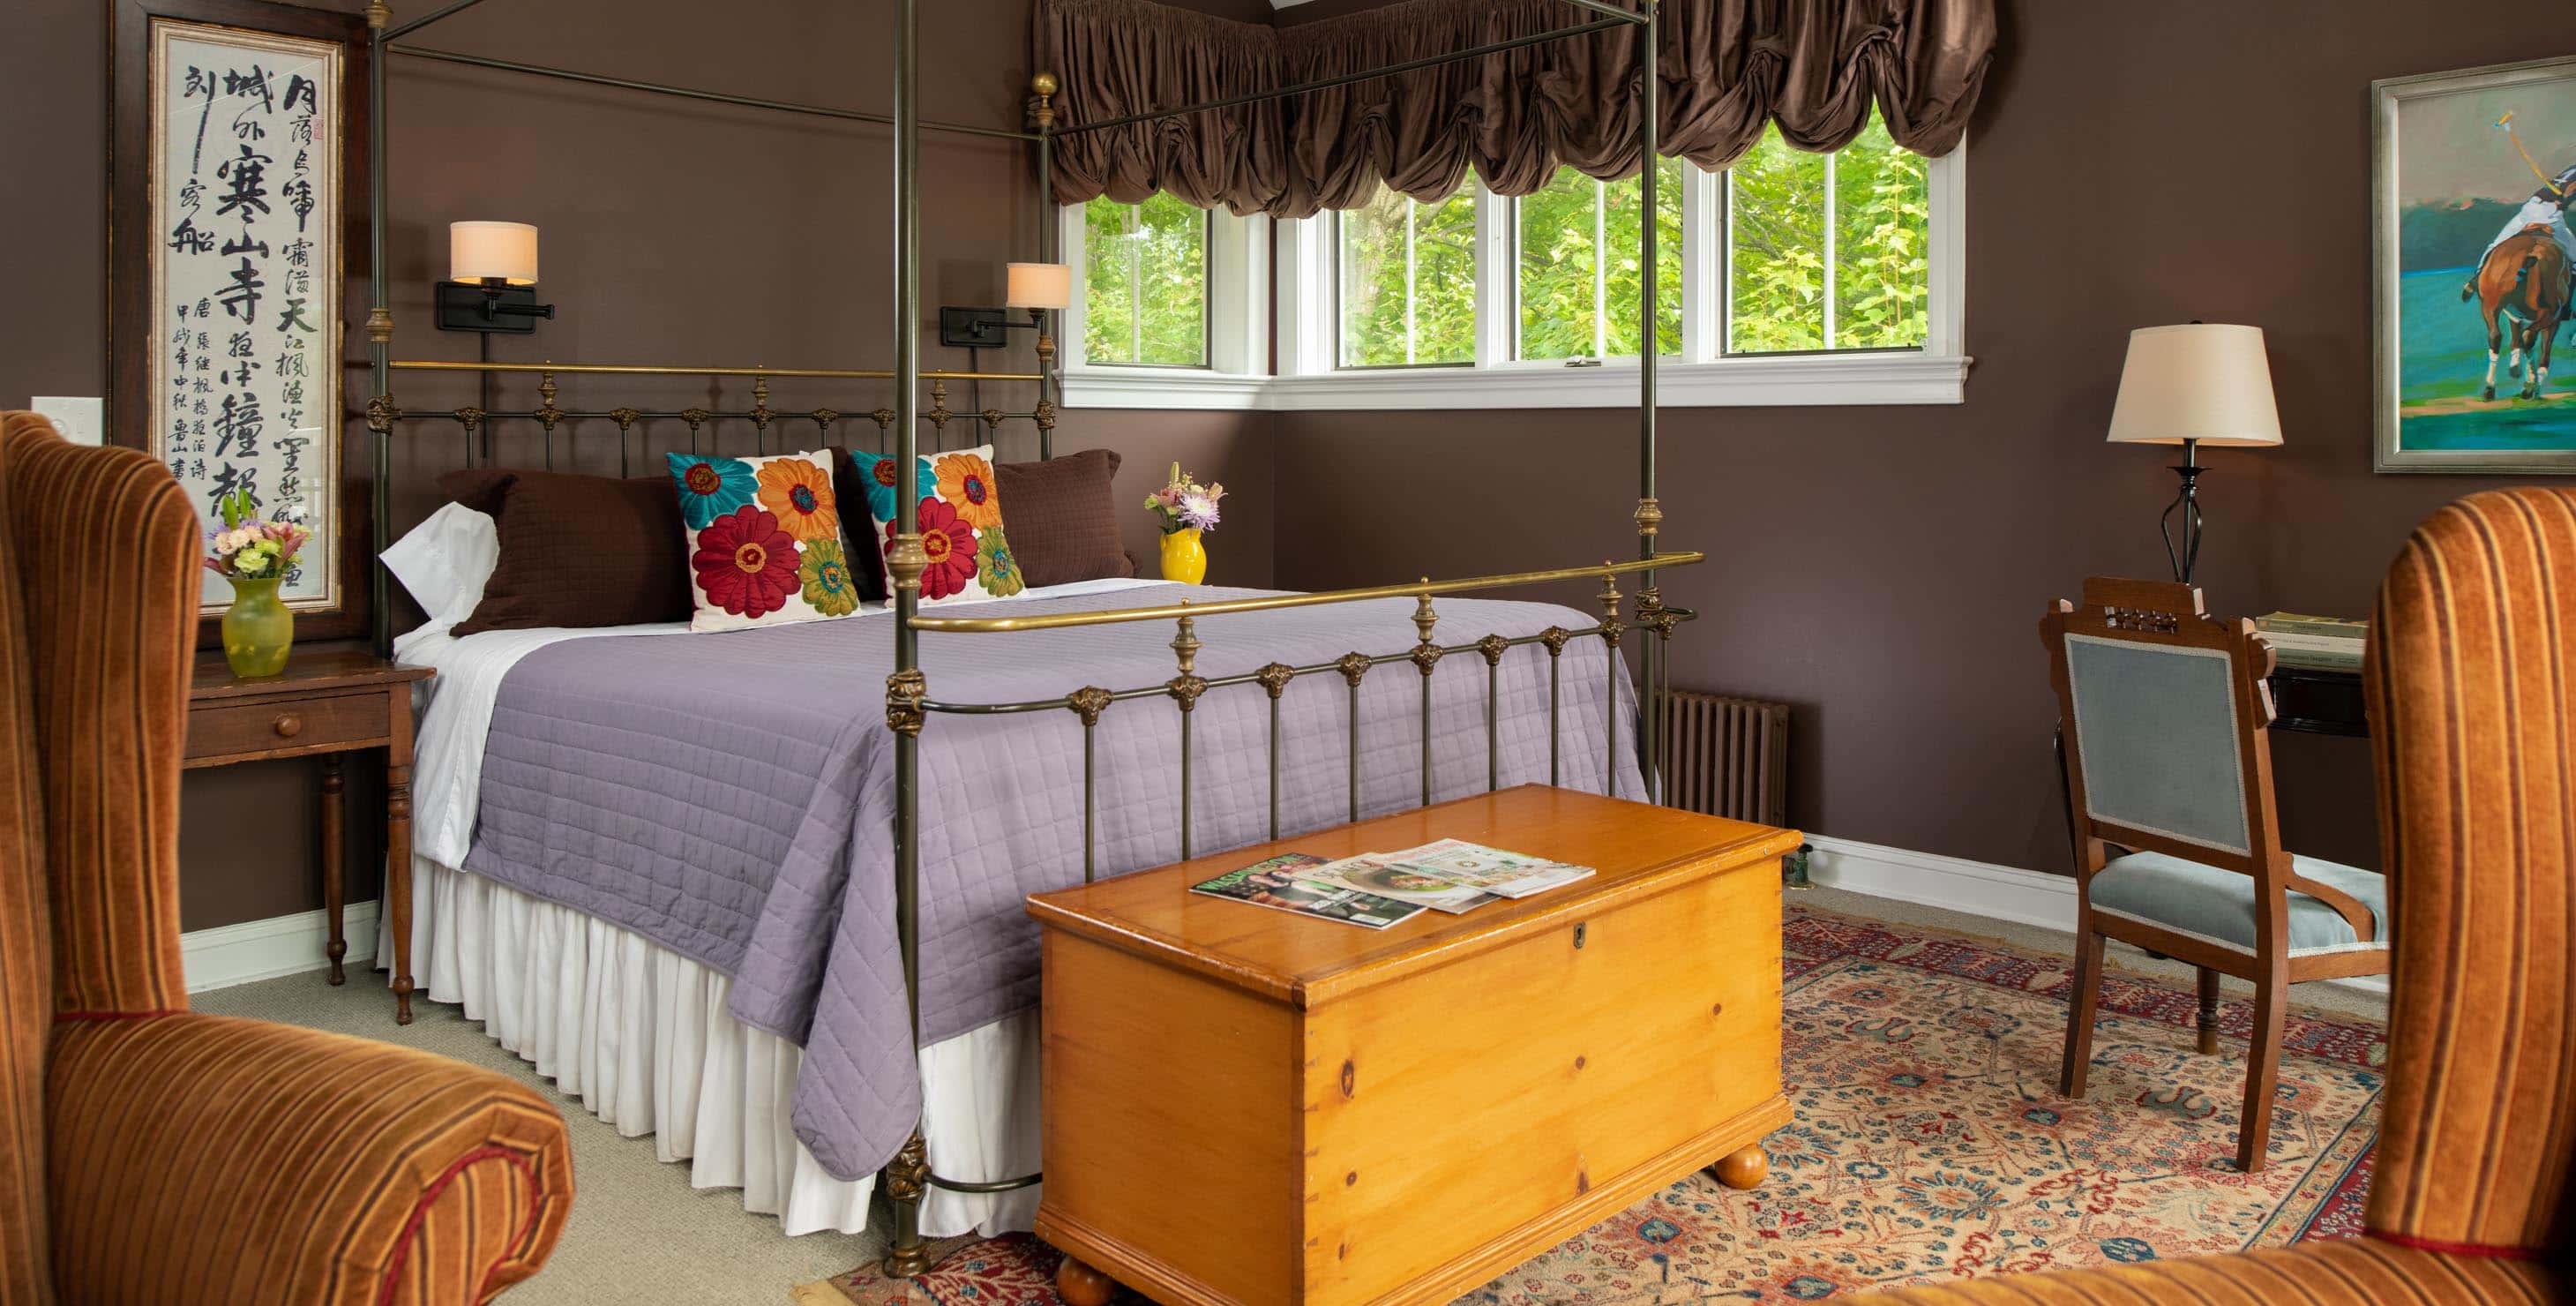 Wrought iron king bed in a room with dark brown walls, and a chest at the foot of the bed and a seating area